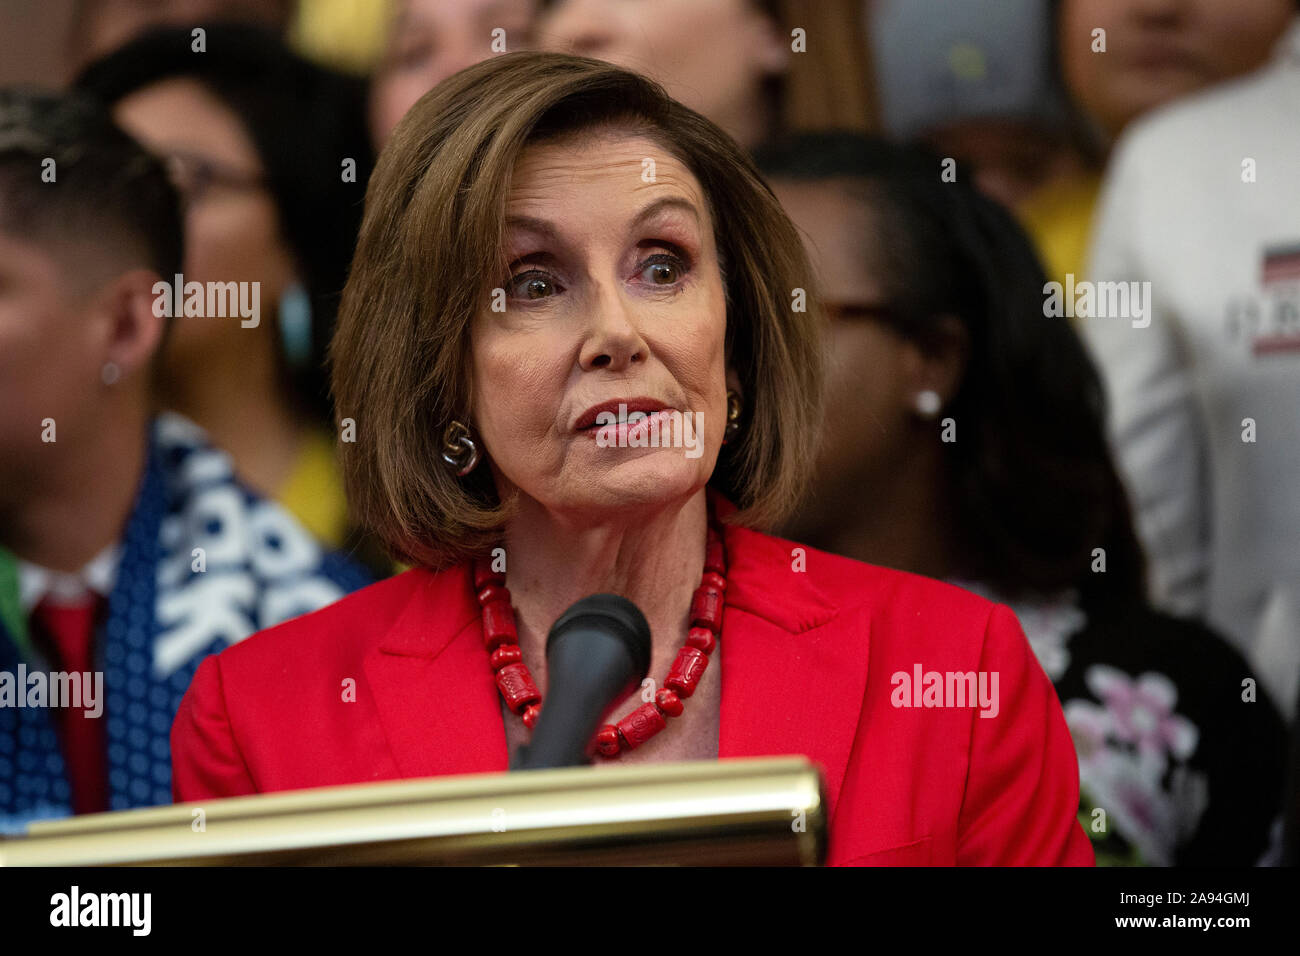 Speaker of the United States House of Representatives Nancy Pelosi (Democrat of California), joined by other Democratic lawmakers, speaks during a press conference on the Deferred Action for Childhood Arrivals program on Capitol Hill in Washington, DC, U.S. on Tuesday, November 12, 2019. The Supreme Court is currently hearing a case that will determine the legality and future of the DACA program. Credit: Stefani Reynolds/CNP /MediaPunch Stock Photo